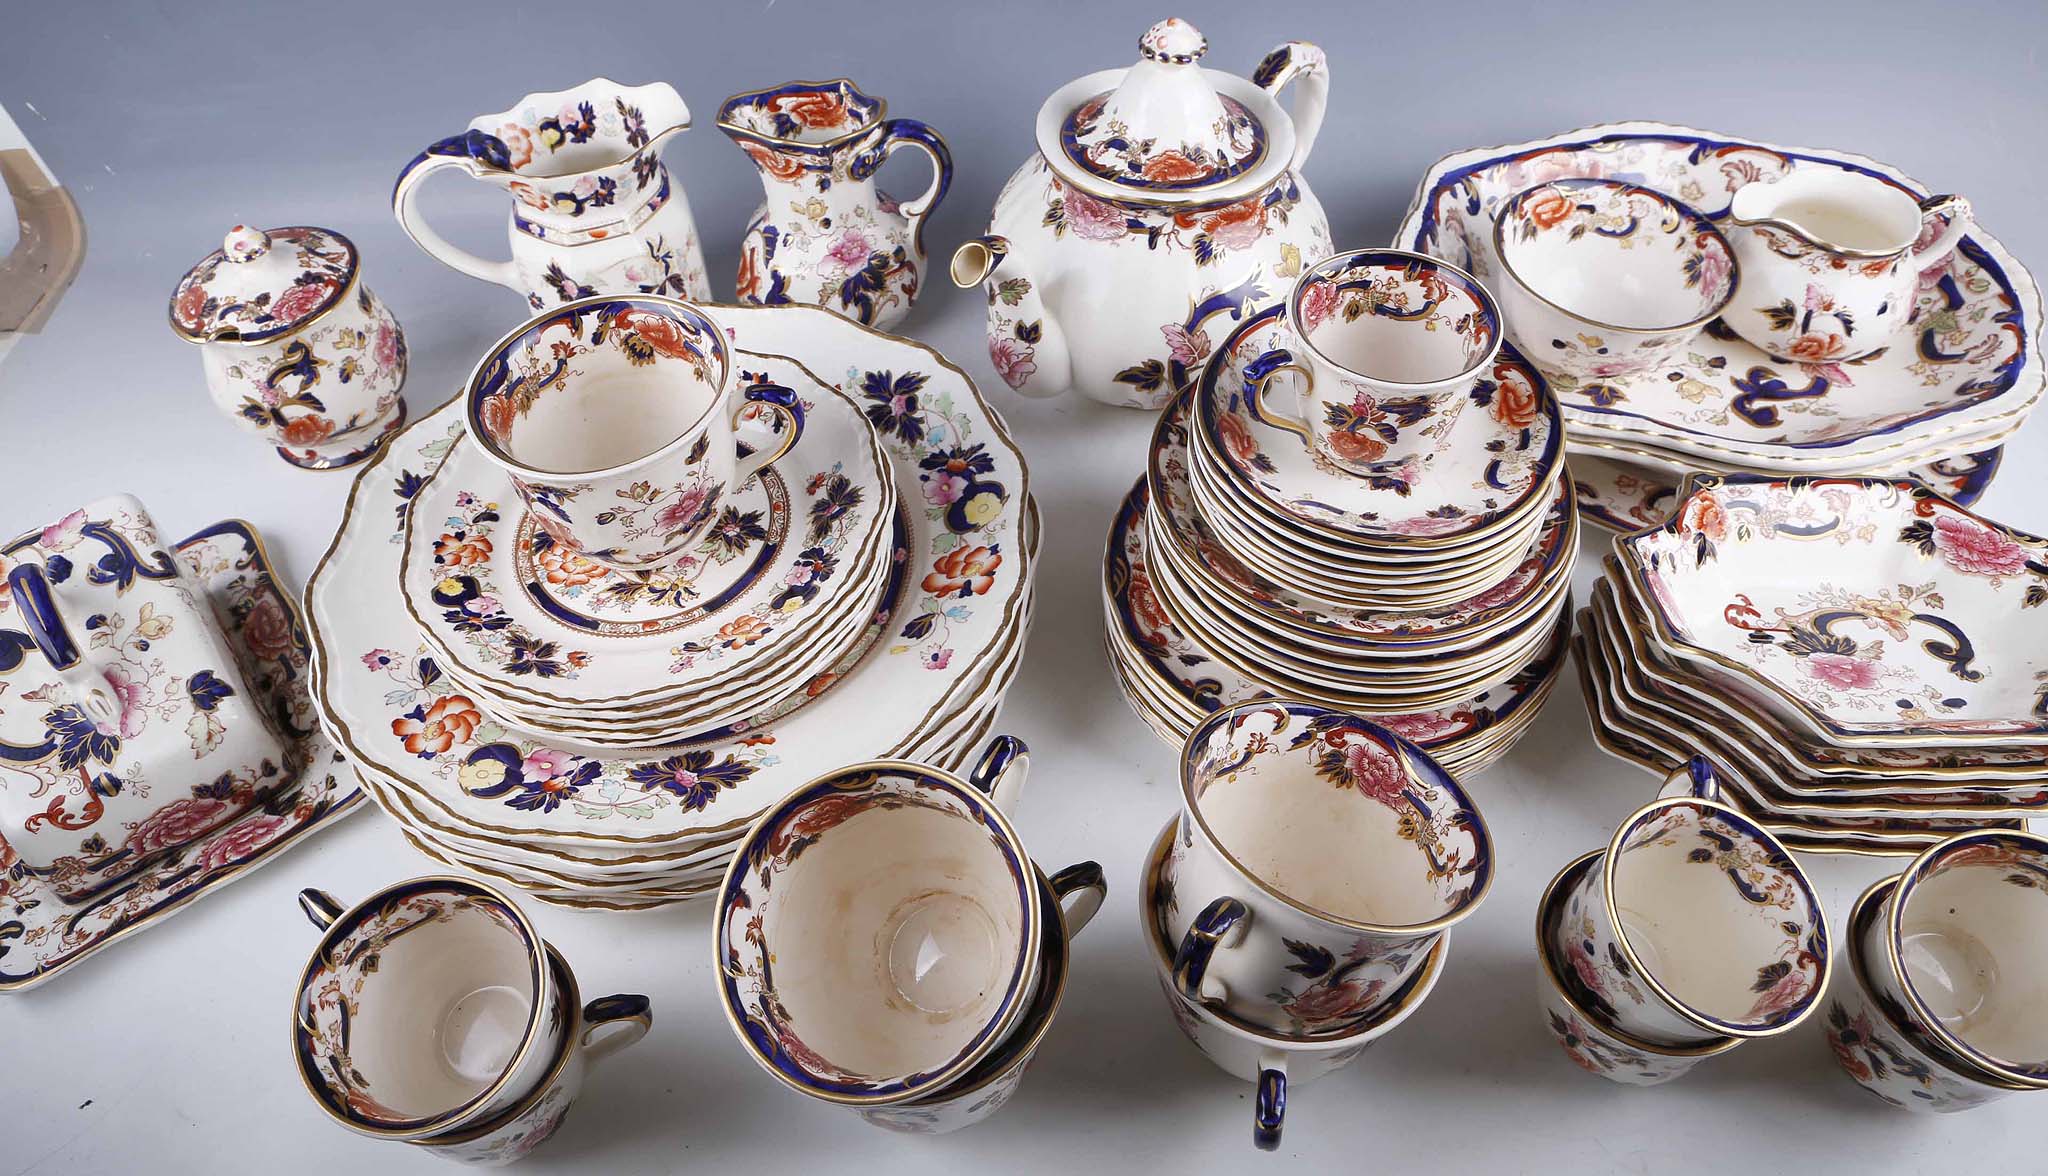 A set of Victorian Masons Ironstone table wares, in Mandalay pattern and comprising dining plates,